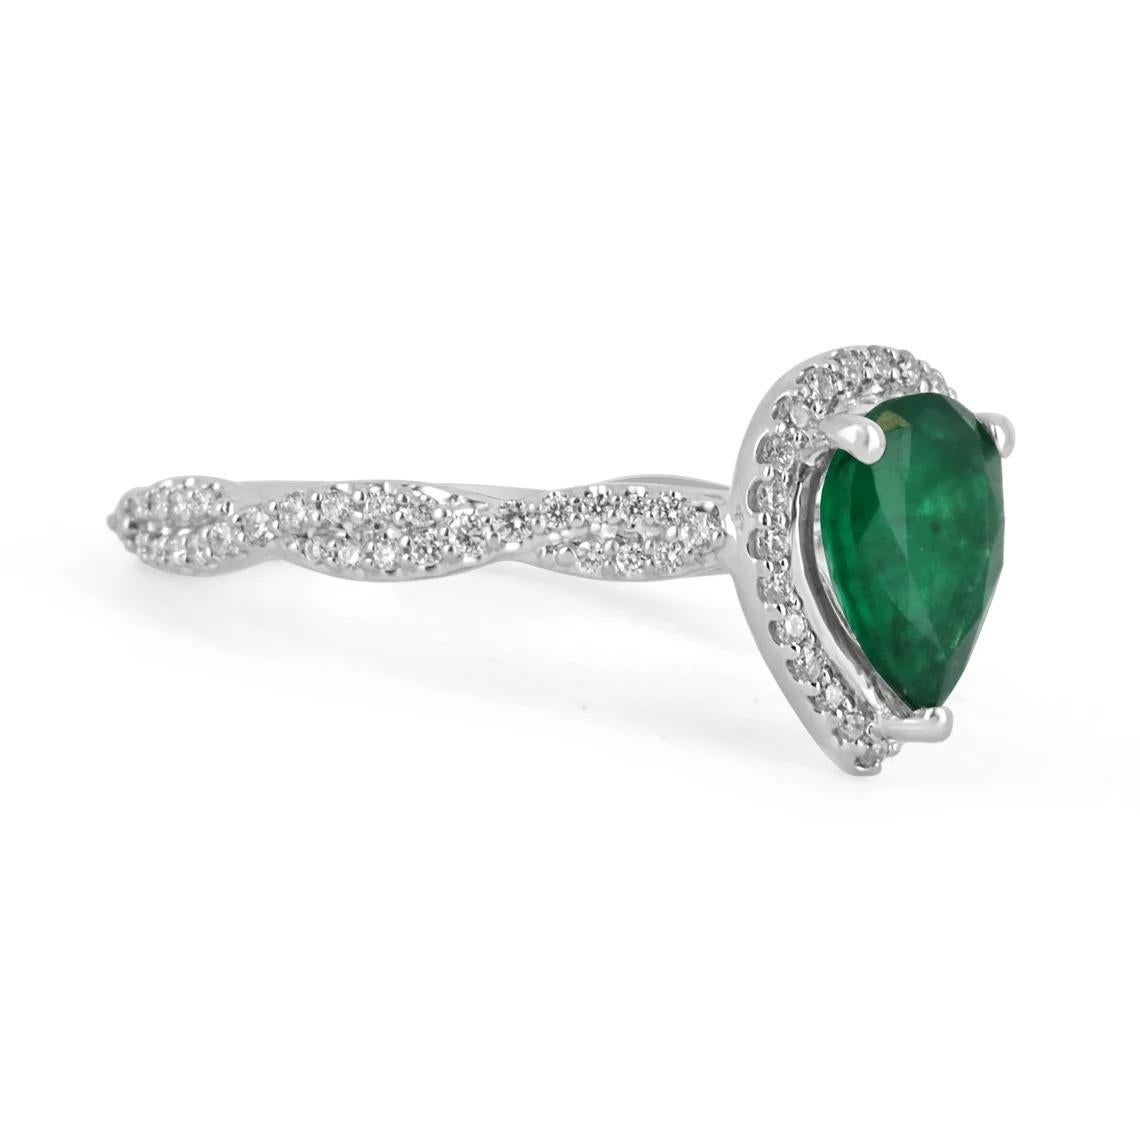 Showcased is a remarkable natural emerald & diamond engagement ring. The center stone displays a stunning, 1.0-carat pear cut Brazilian emerald with excellent qualities. A desirable dark green color, and very good luster. Surrounding this precious